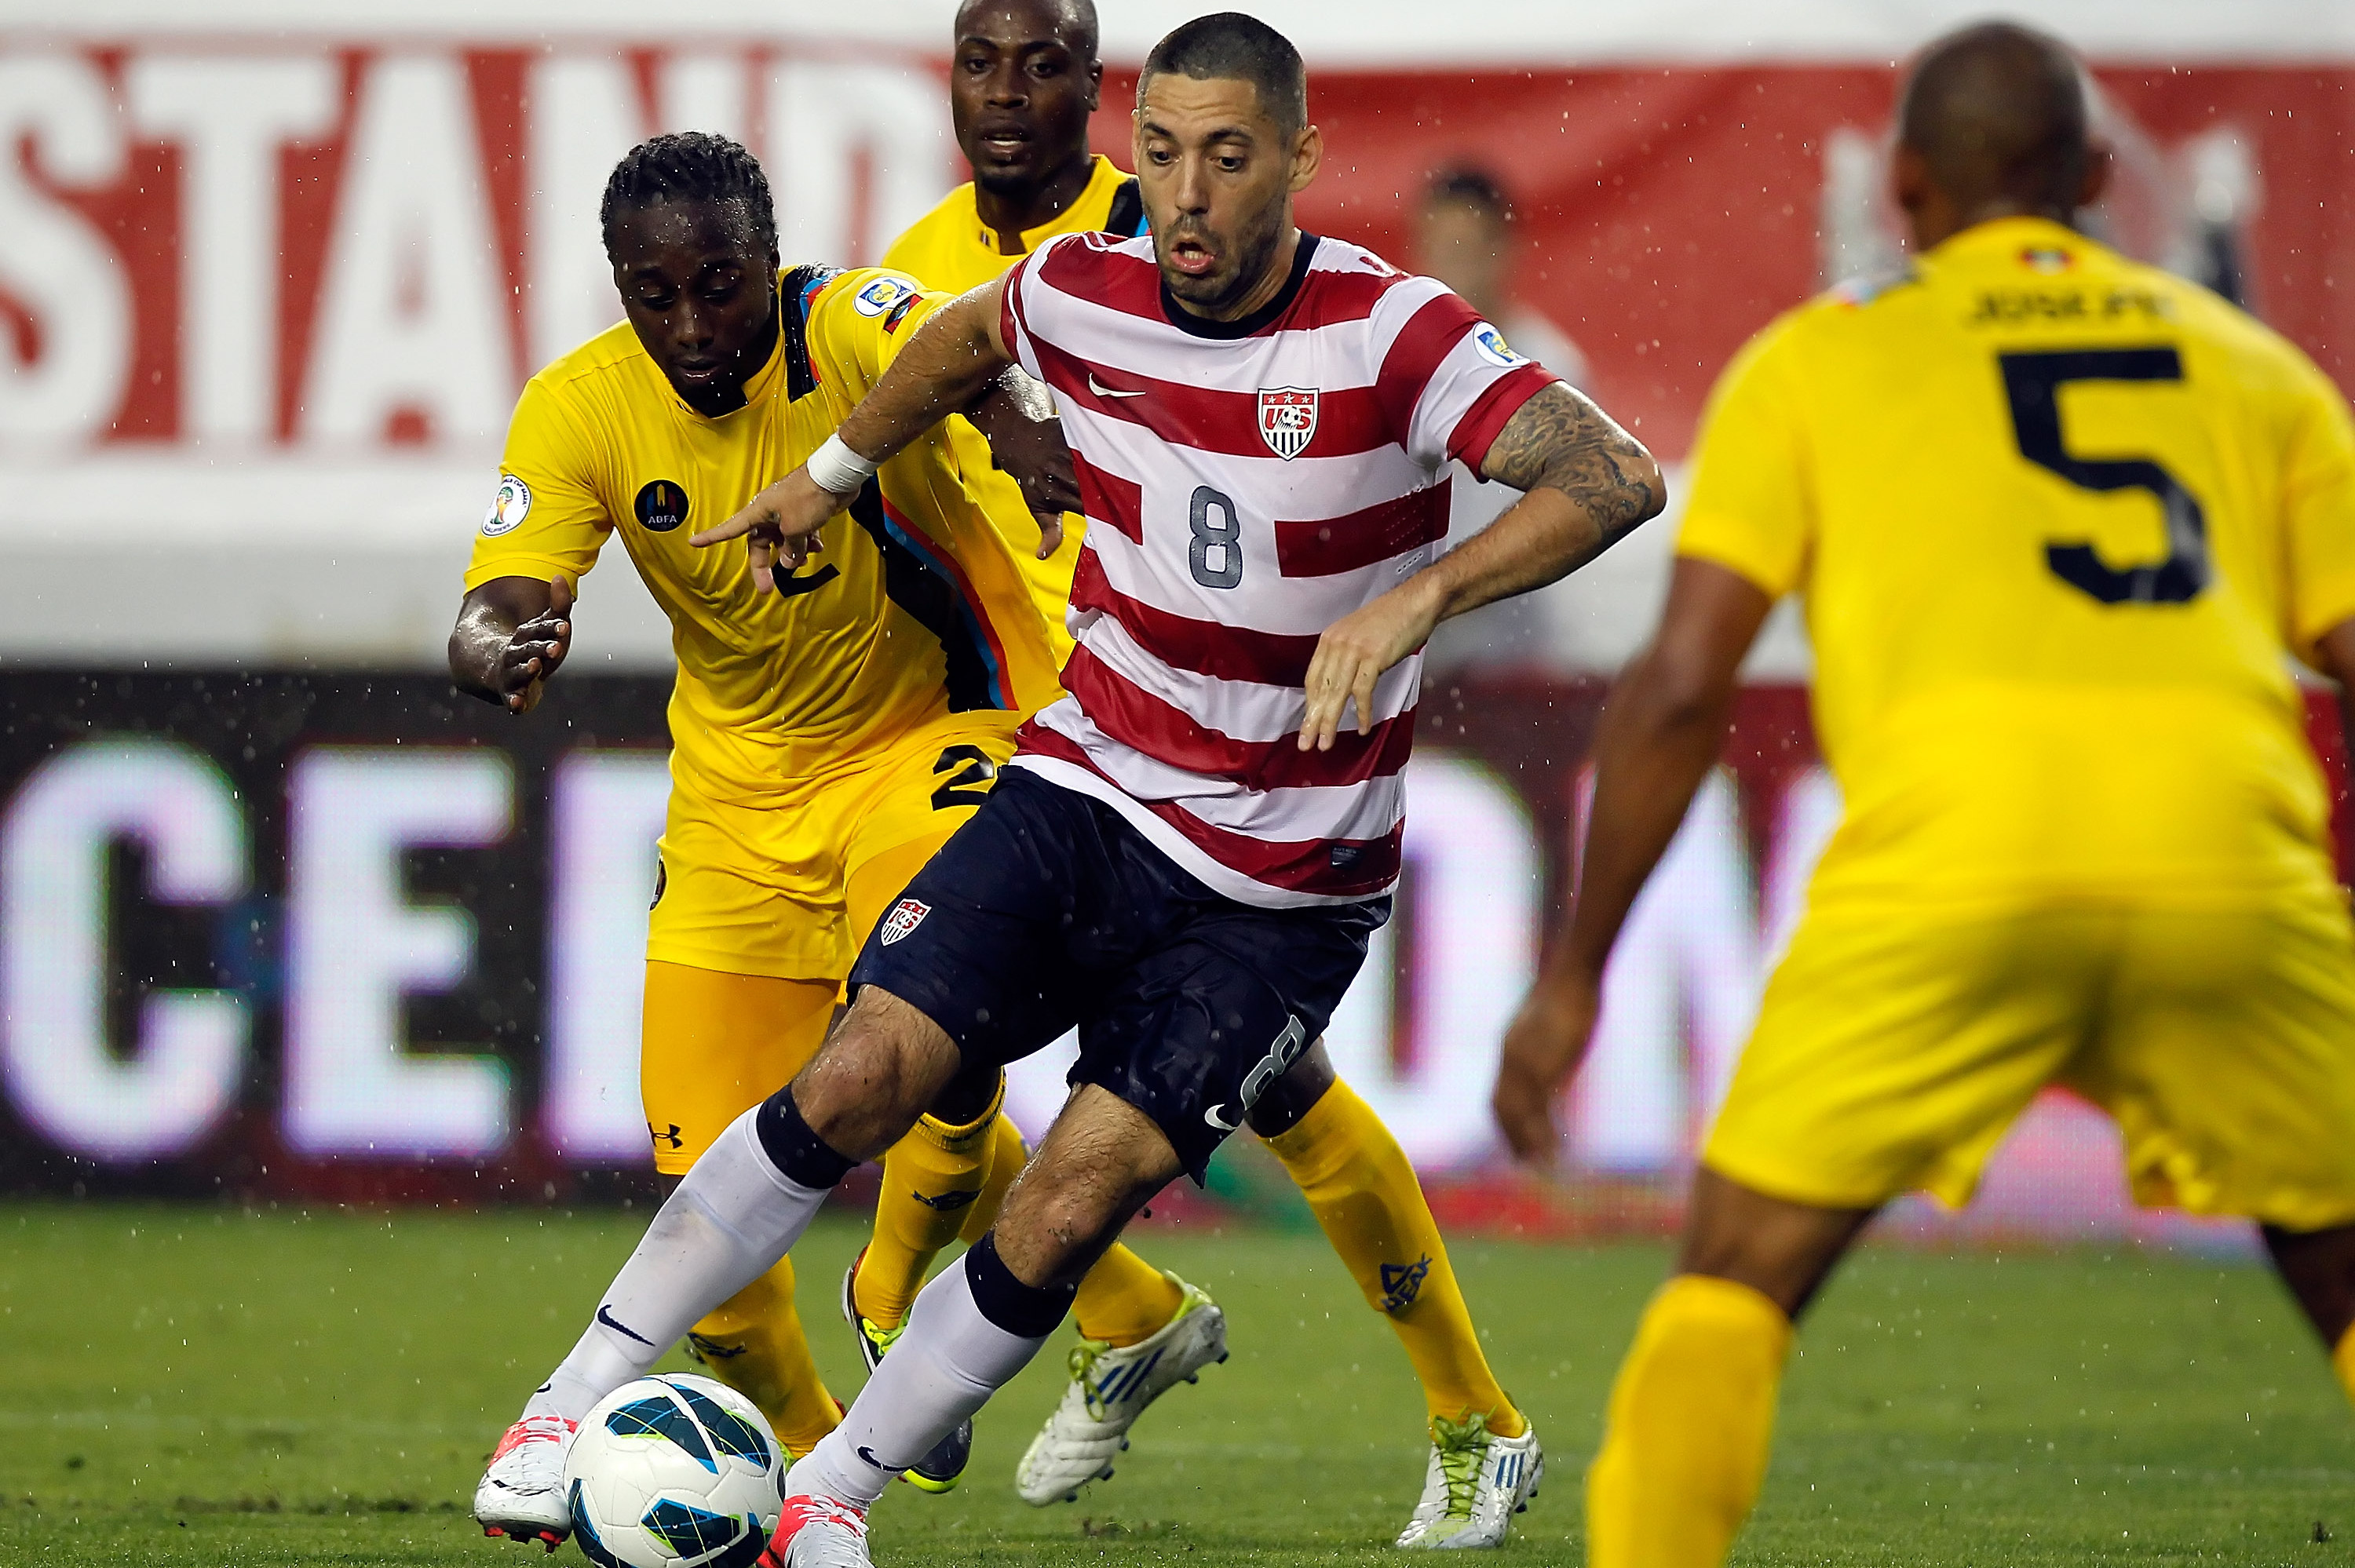 Clint Dempsey returns to USMNT with hat trick